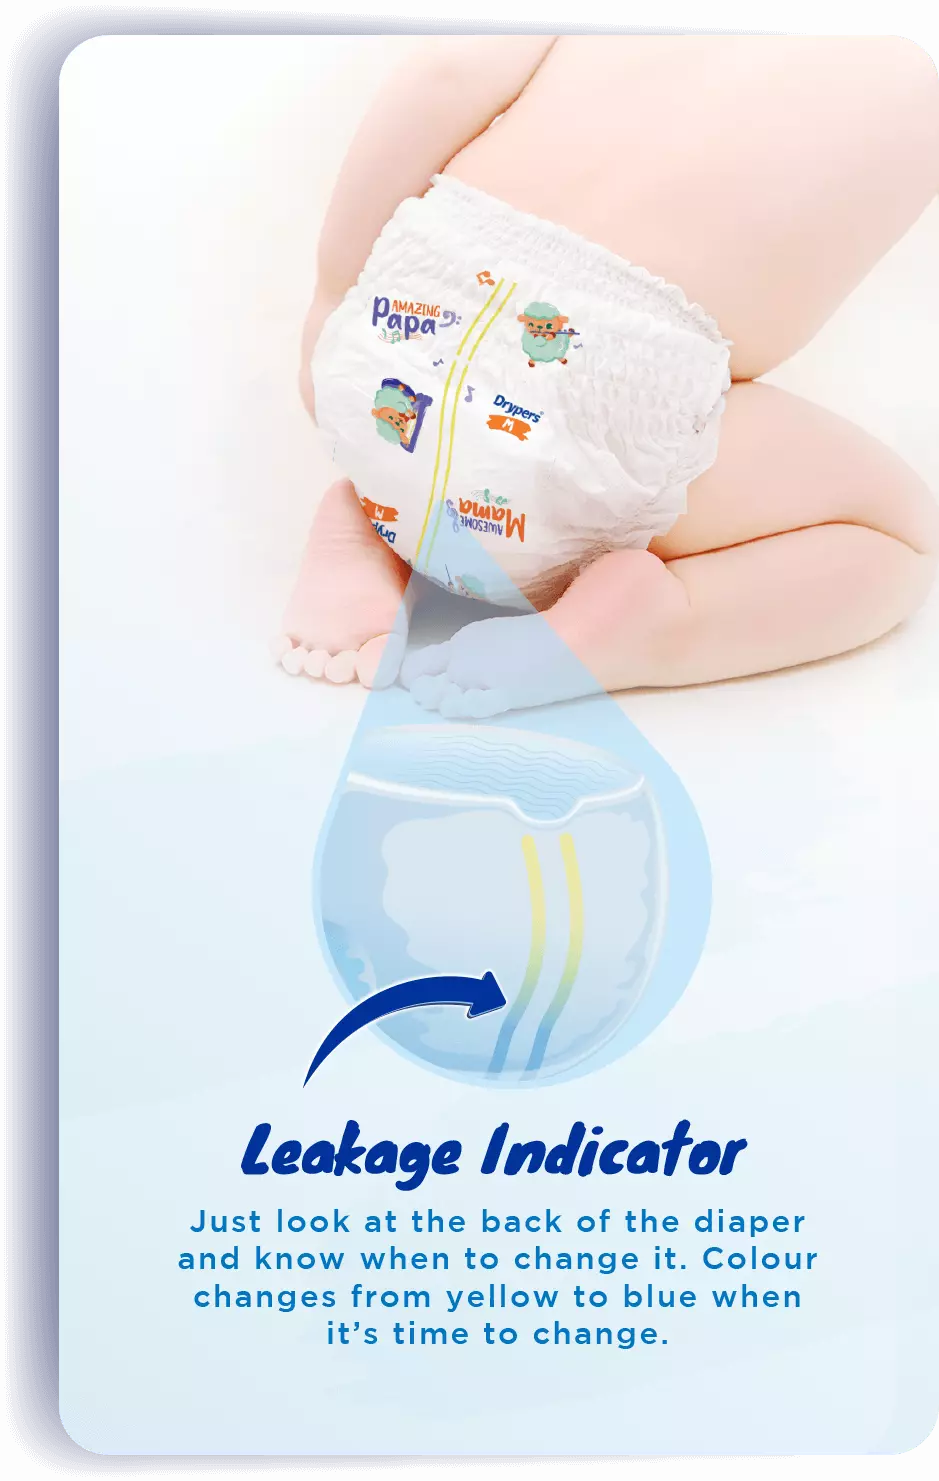 Leakage Indicator: Just look at the back of the diaper and know when to change it. Colour changes from yellow to blue when
                it's time to change.